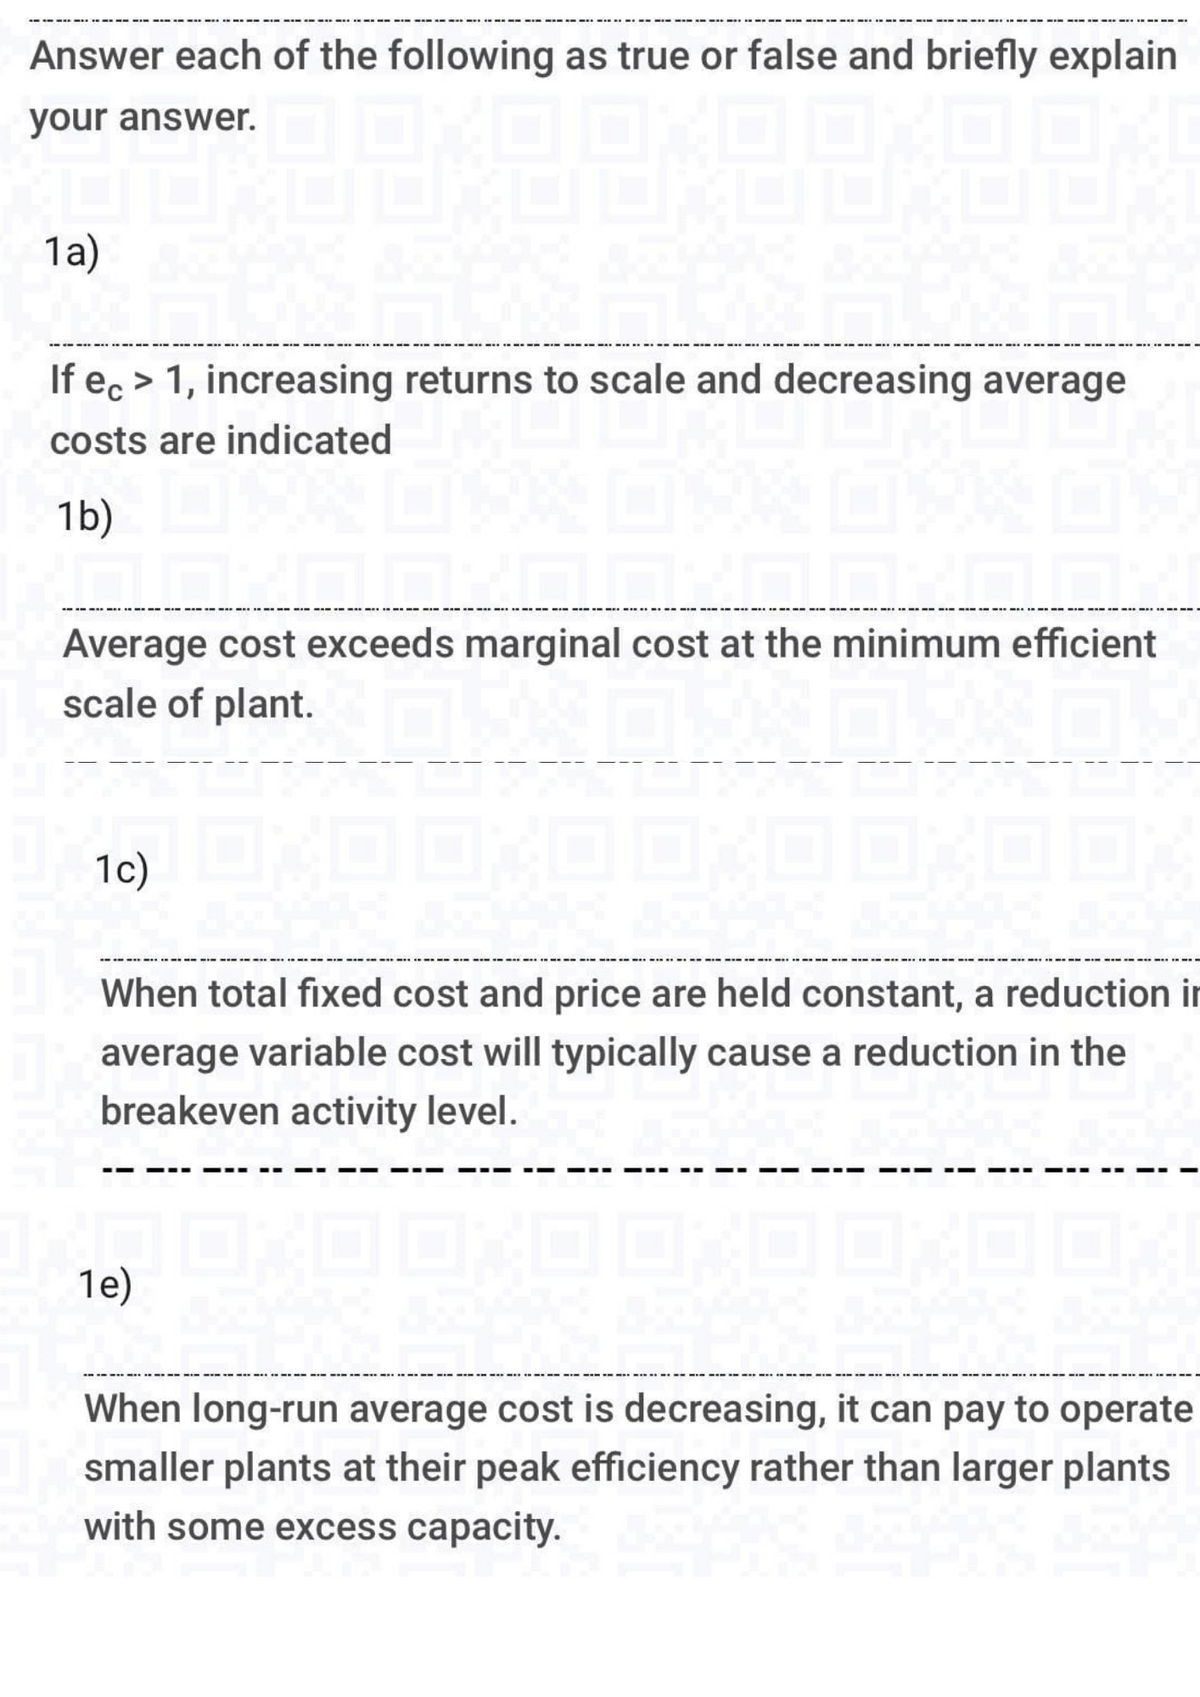 Answer each of the following as true or false and briefly explain
your answer.
9
39
8
1a)
If ec> 1, increasing returns to scale and decreasing average
costs are indicated
1b)
7
17
▬▬▬▬▬▬▬▬▬▬▬▬▬▬▬▬▬▬▬
Average cost exceeds marginal cost at the minimum efficient
scale of plant.
0
0
1c) DA
When total fixed cost and price are held constant, a reduction in
average variable cost will typically cause a reduction in the
breakeven activity level.
10X00X0 0,0 0,0 0
When long-run average cost is decreasing, it can pay to operate
smaller plants at their peak efficiency rather than larger plants
with some excess capacity.